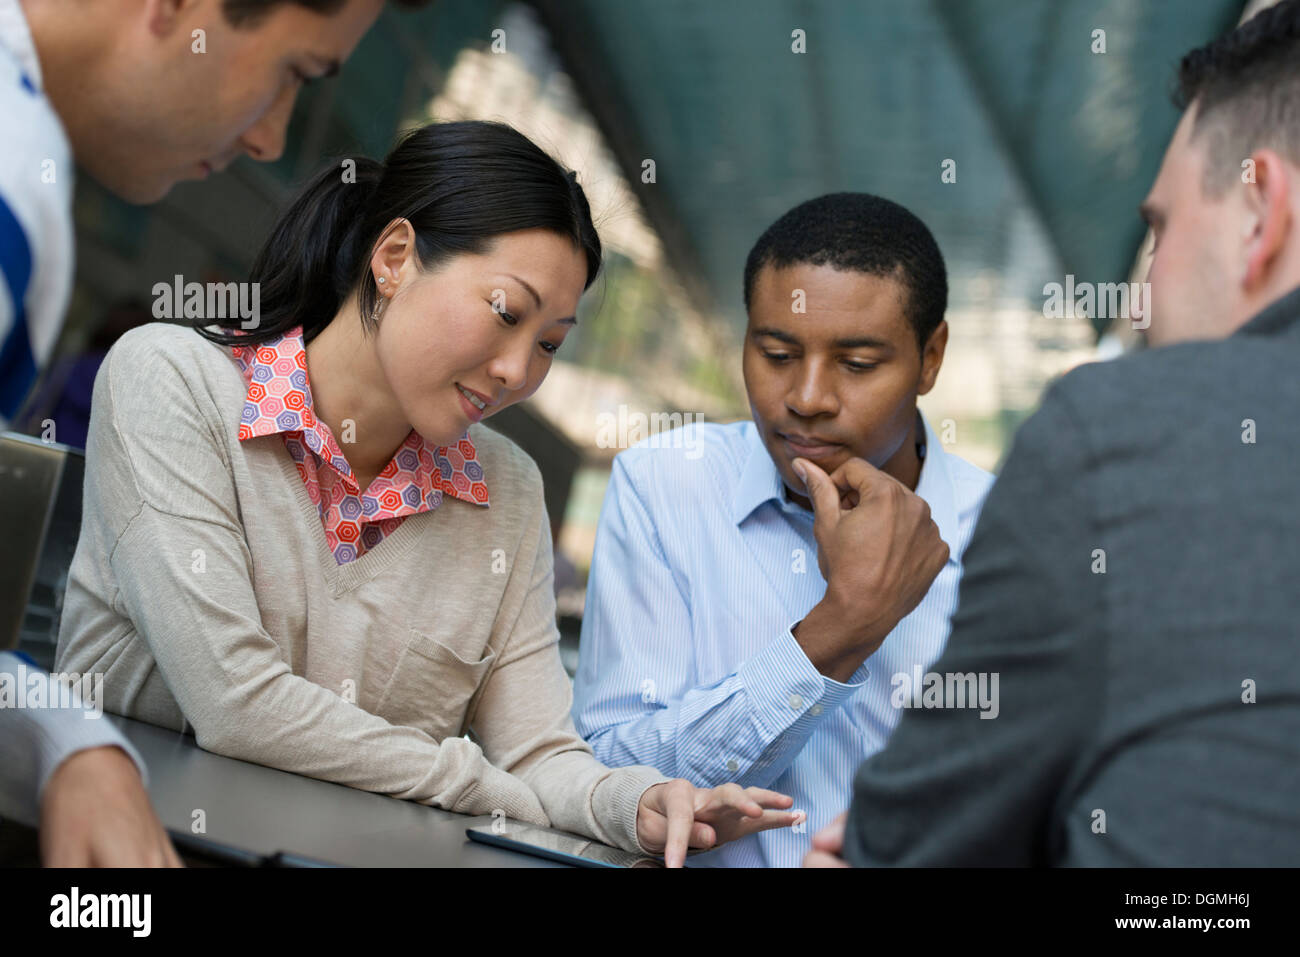 Business people on the move. Four people gathered around a digital tablet having a discussion. Stock Photo